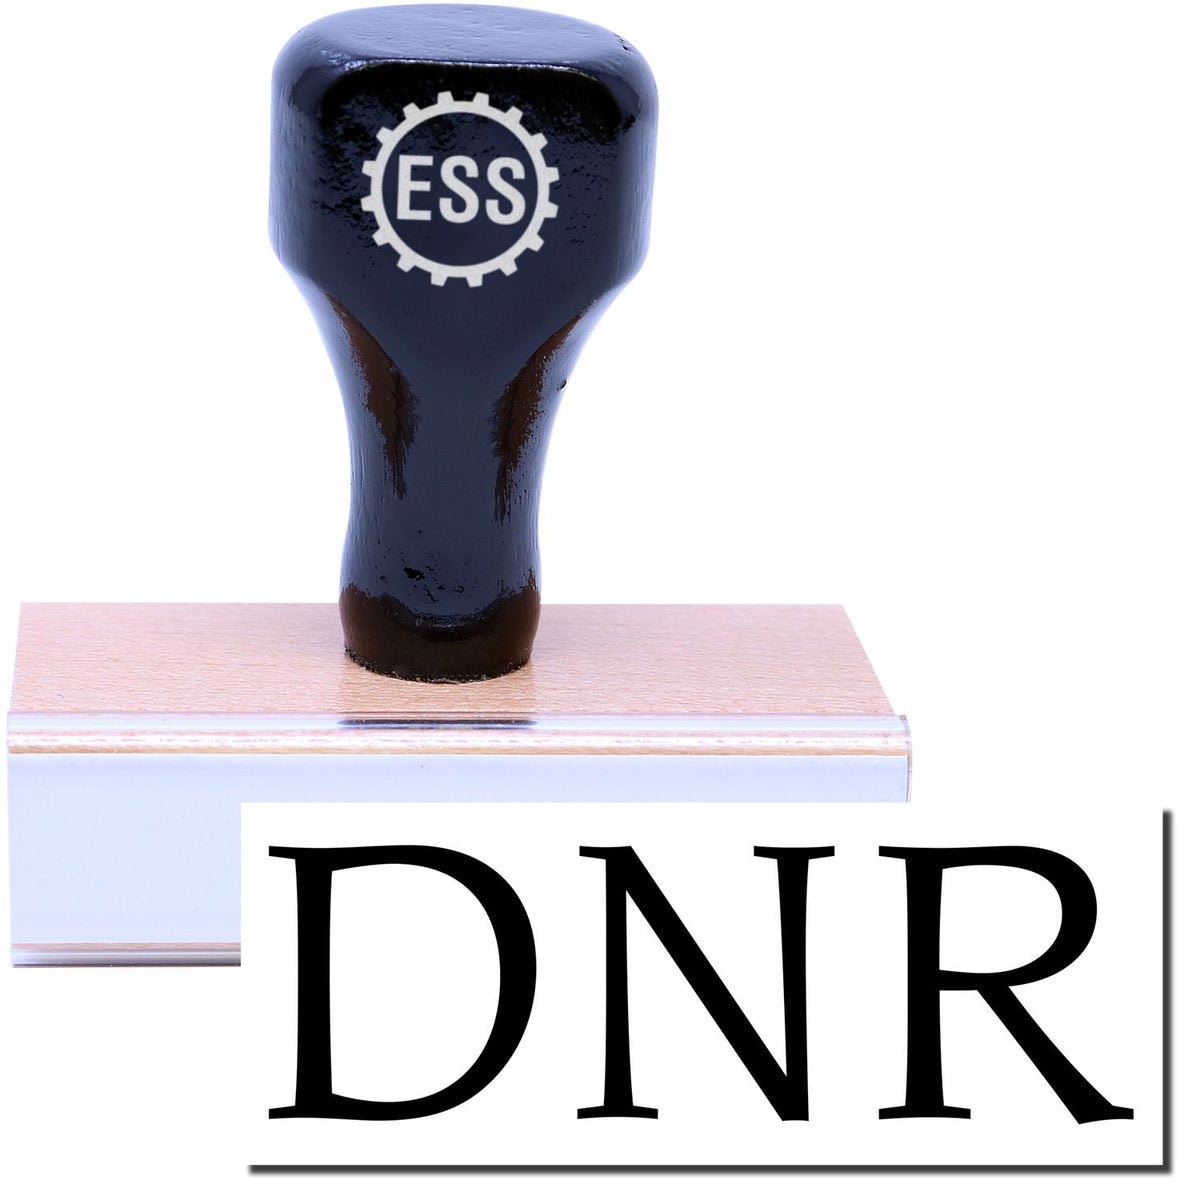 A stock office medical rubber stamp with a stamped image showing how the text &quot;DNR&quot; is displayed after stamping.